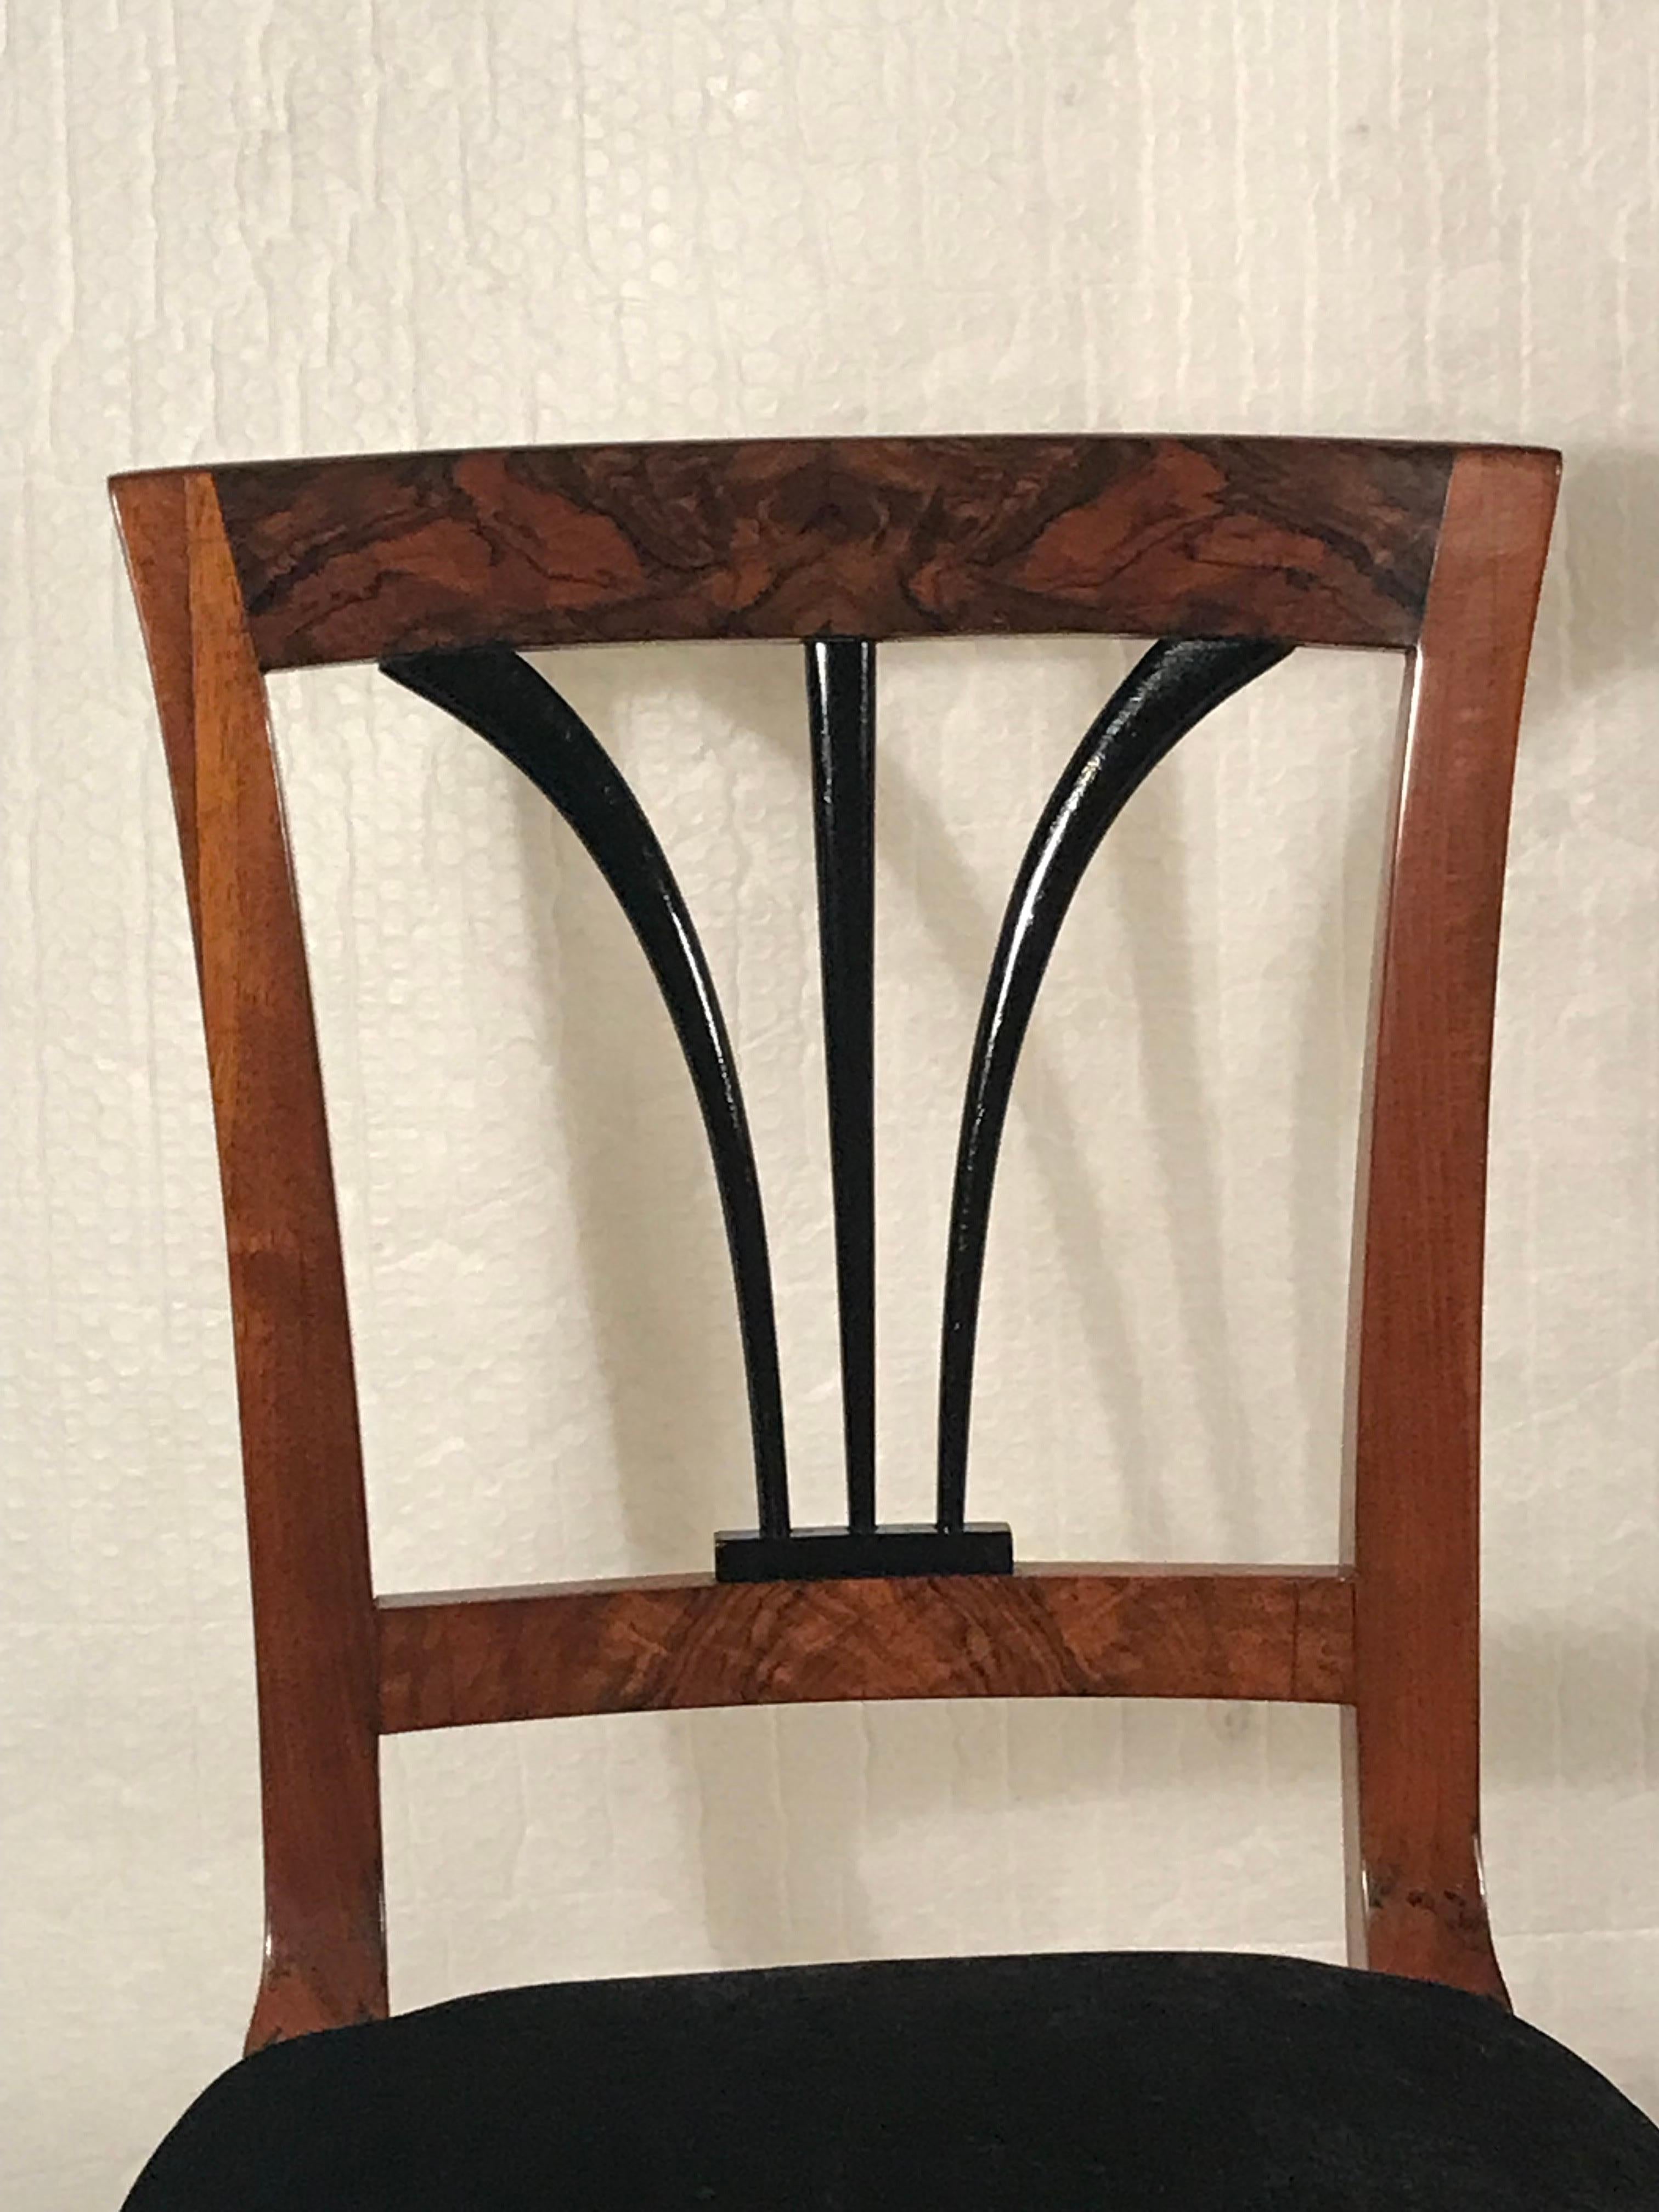 Discover a timeless piece of history with our classic Biedermeier chair from 1820s Southern Germany. Crafted with beautiful walnut veneer and showcasing an elegant ebonized back design.
Expertly refinished with a shellac hand polish and featuring